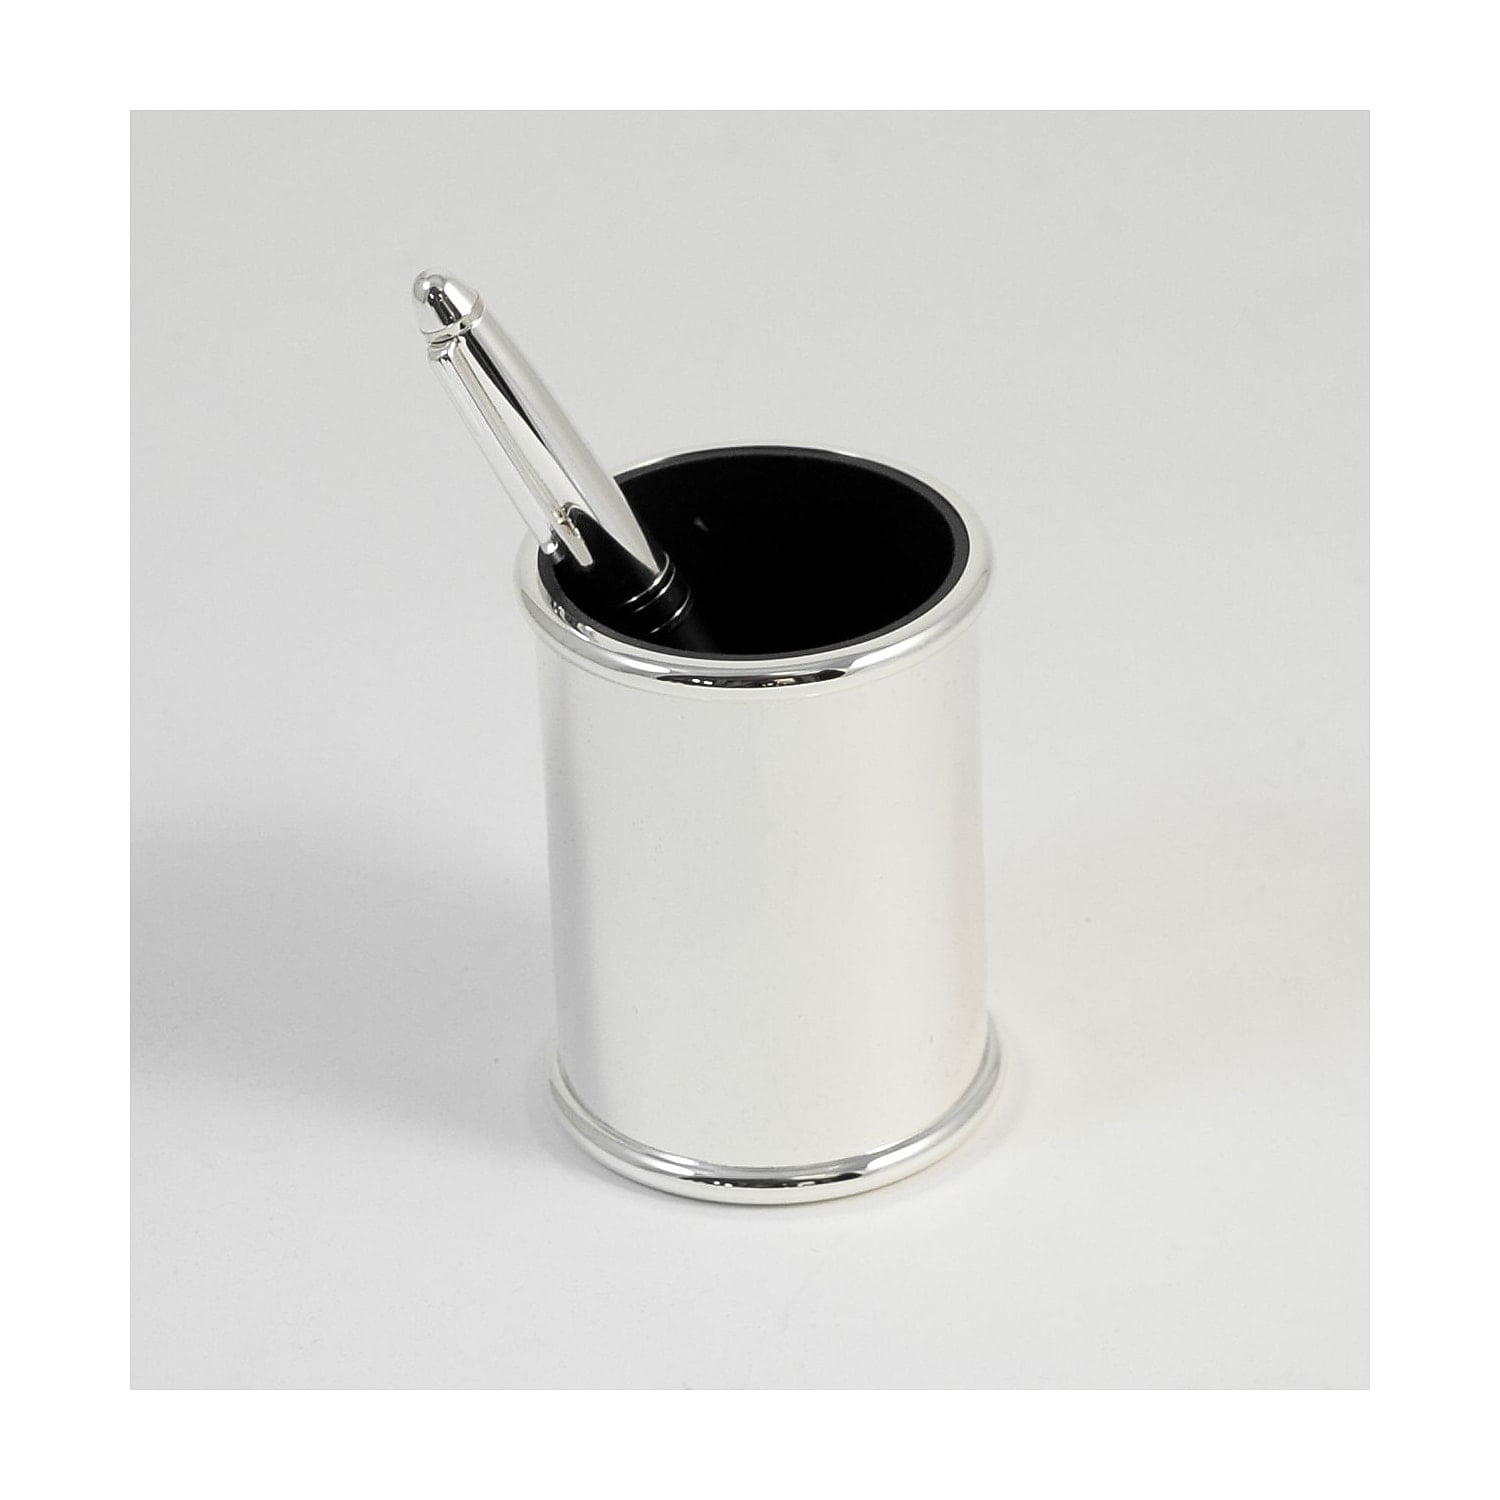 Bey-berk International D595 Silver Plated Pen Cup With Black Abs Plastic Lining - Black